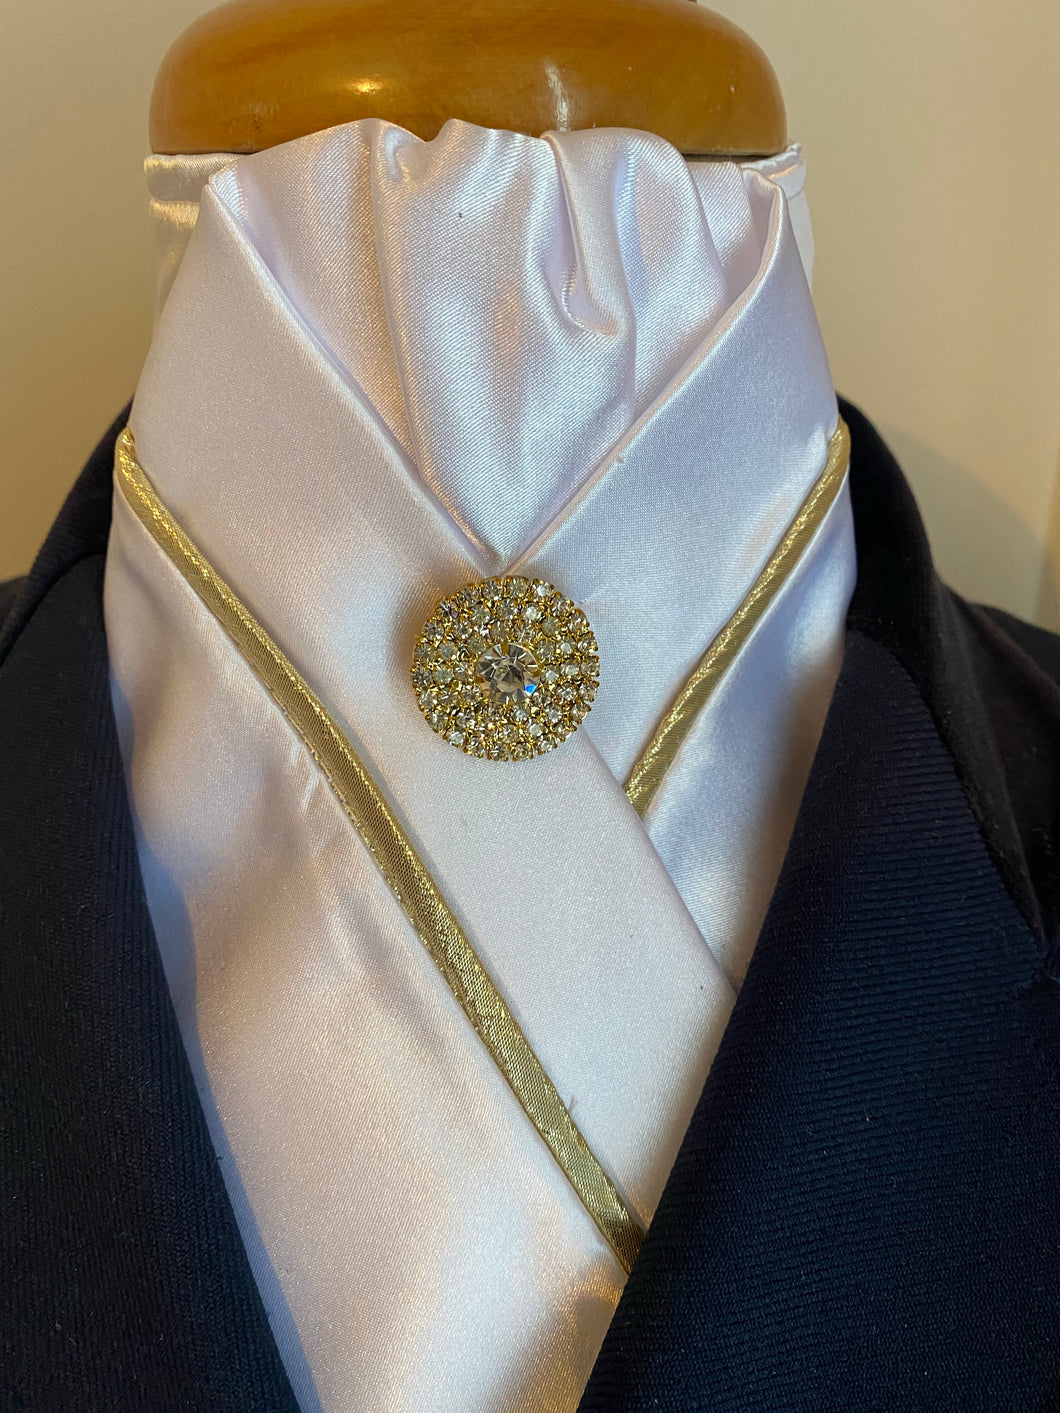 HHD White Custom Stock Tie Gold Piping with Rhinestone Pin